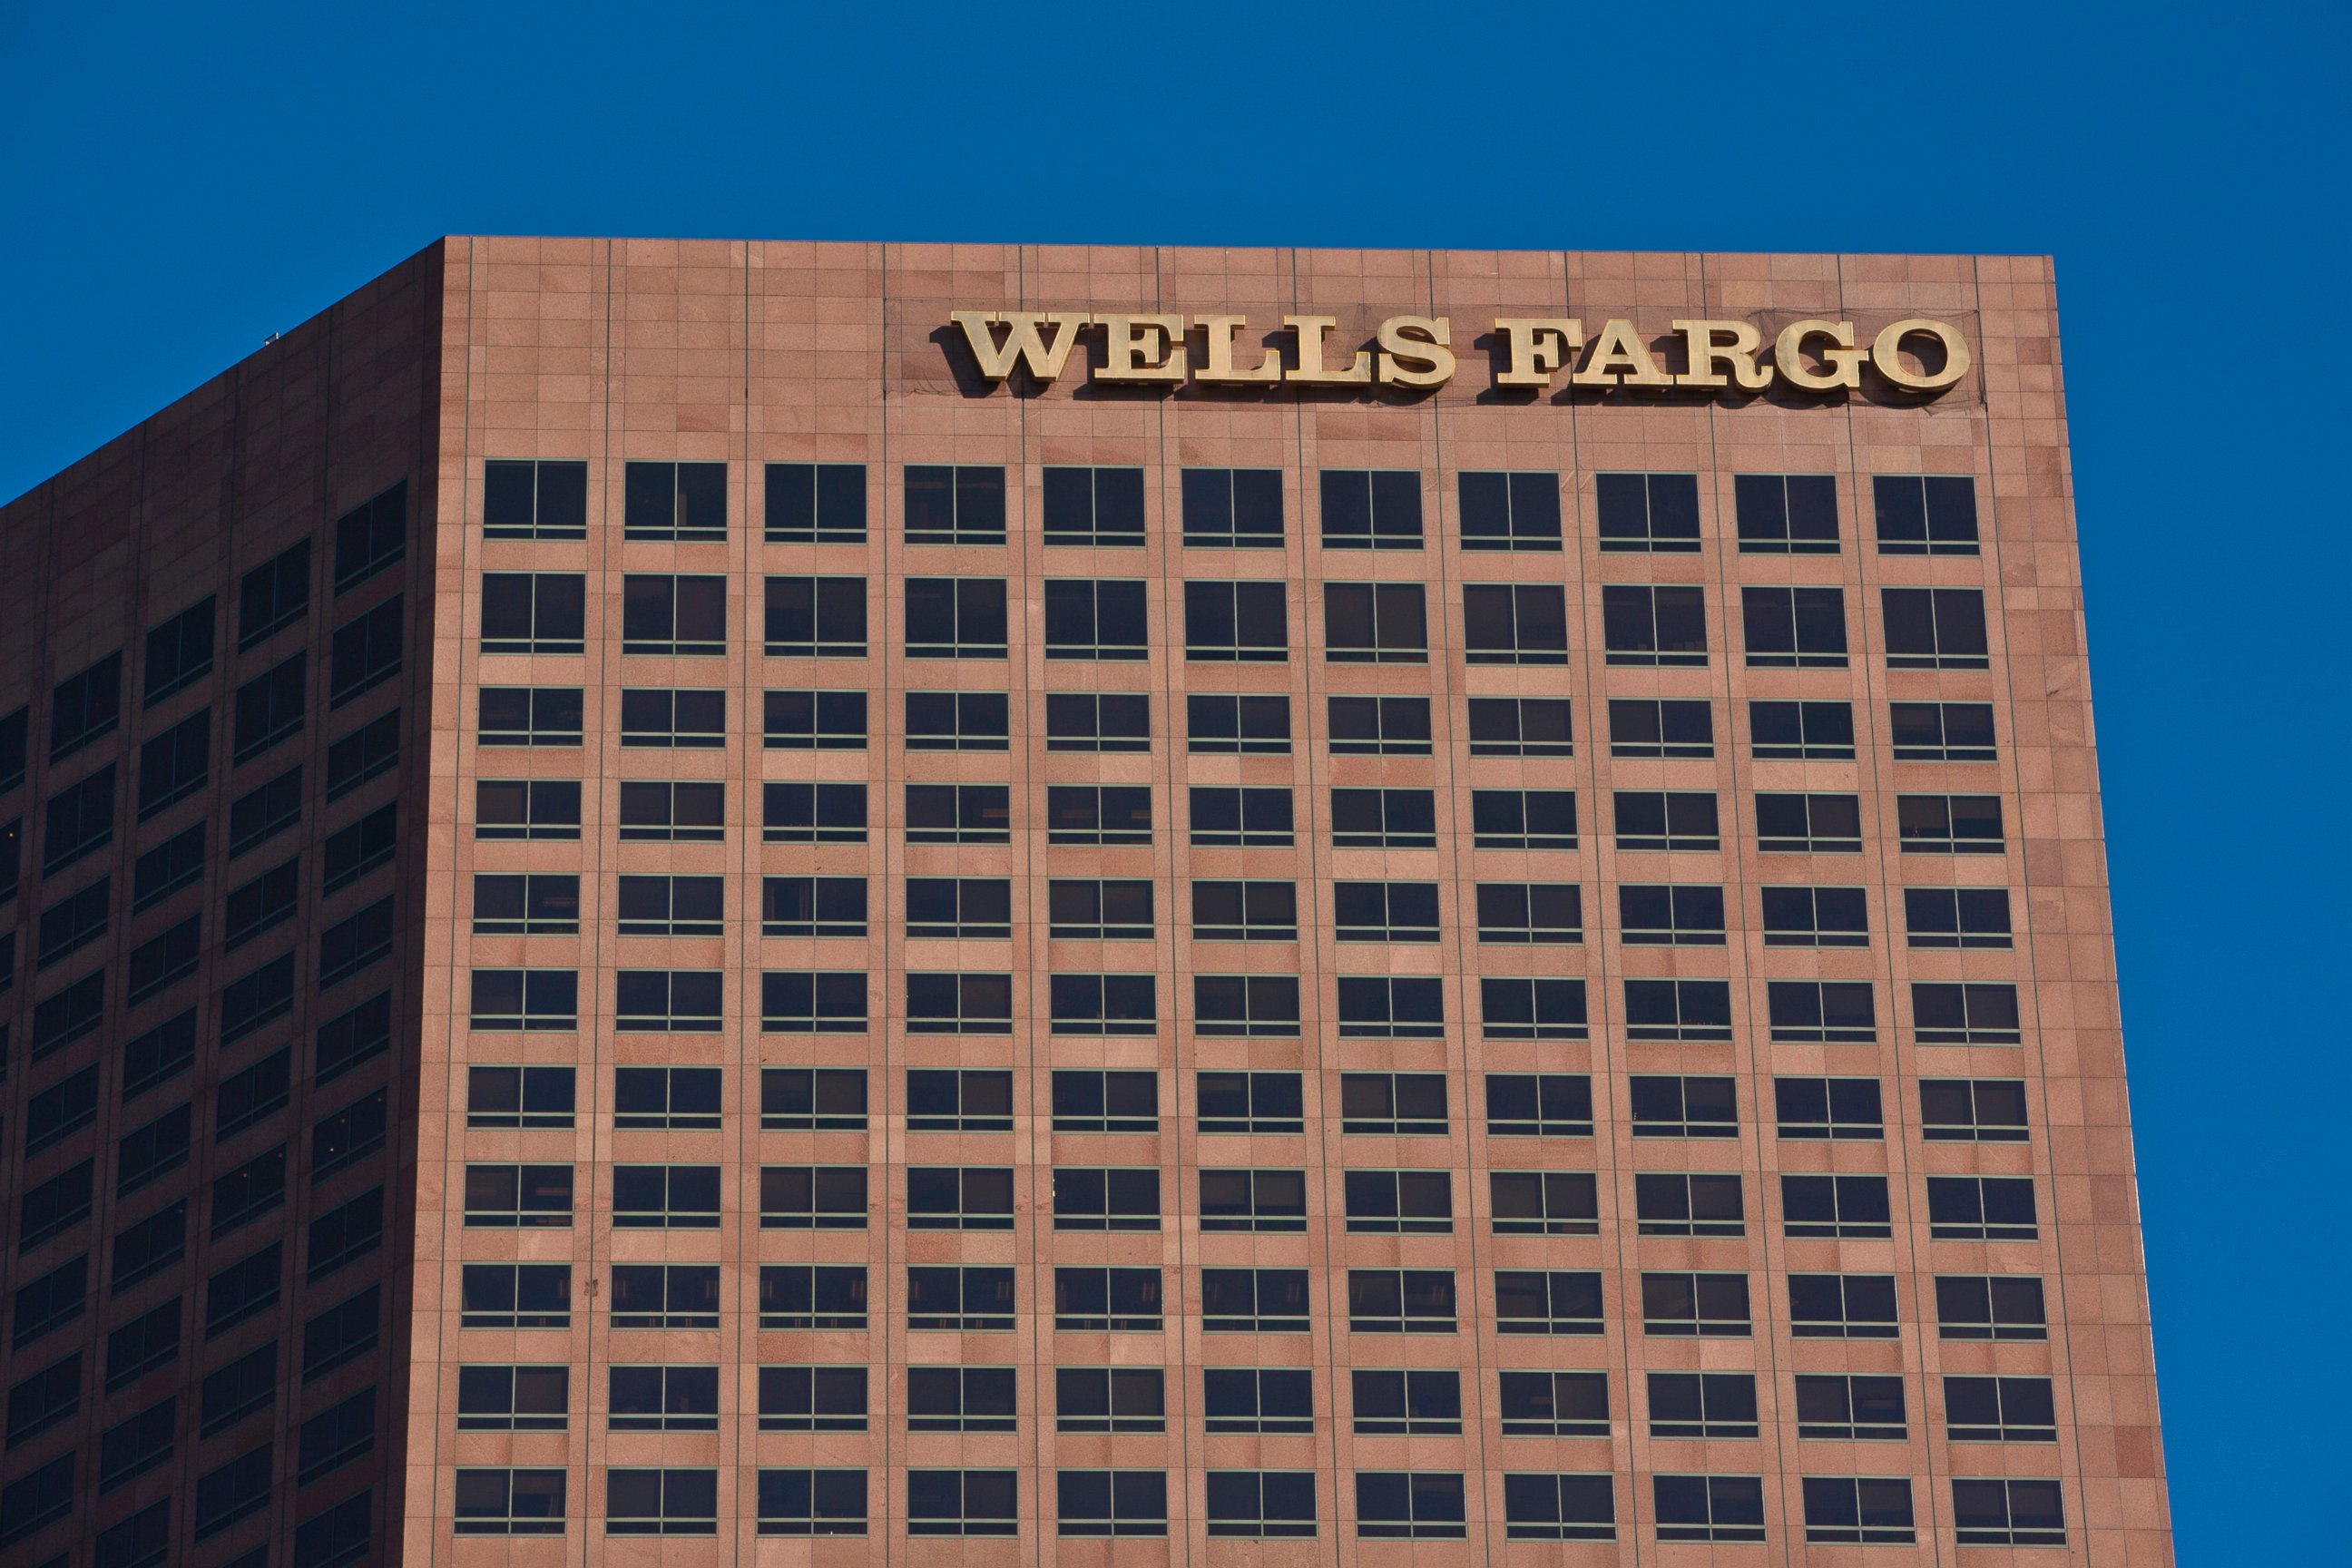 PHOTO: The downtown Wells Fargo high-rise building is seen on Jan. 27, 2012 in Los Angeles.